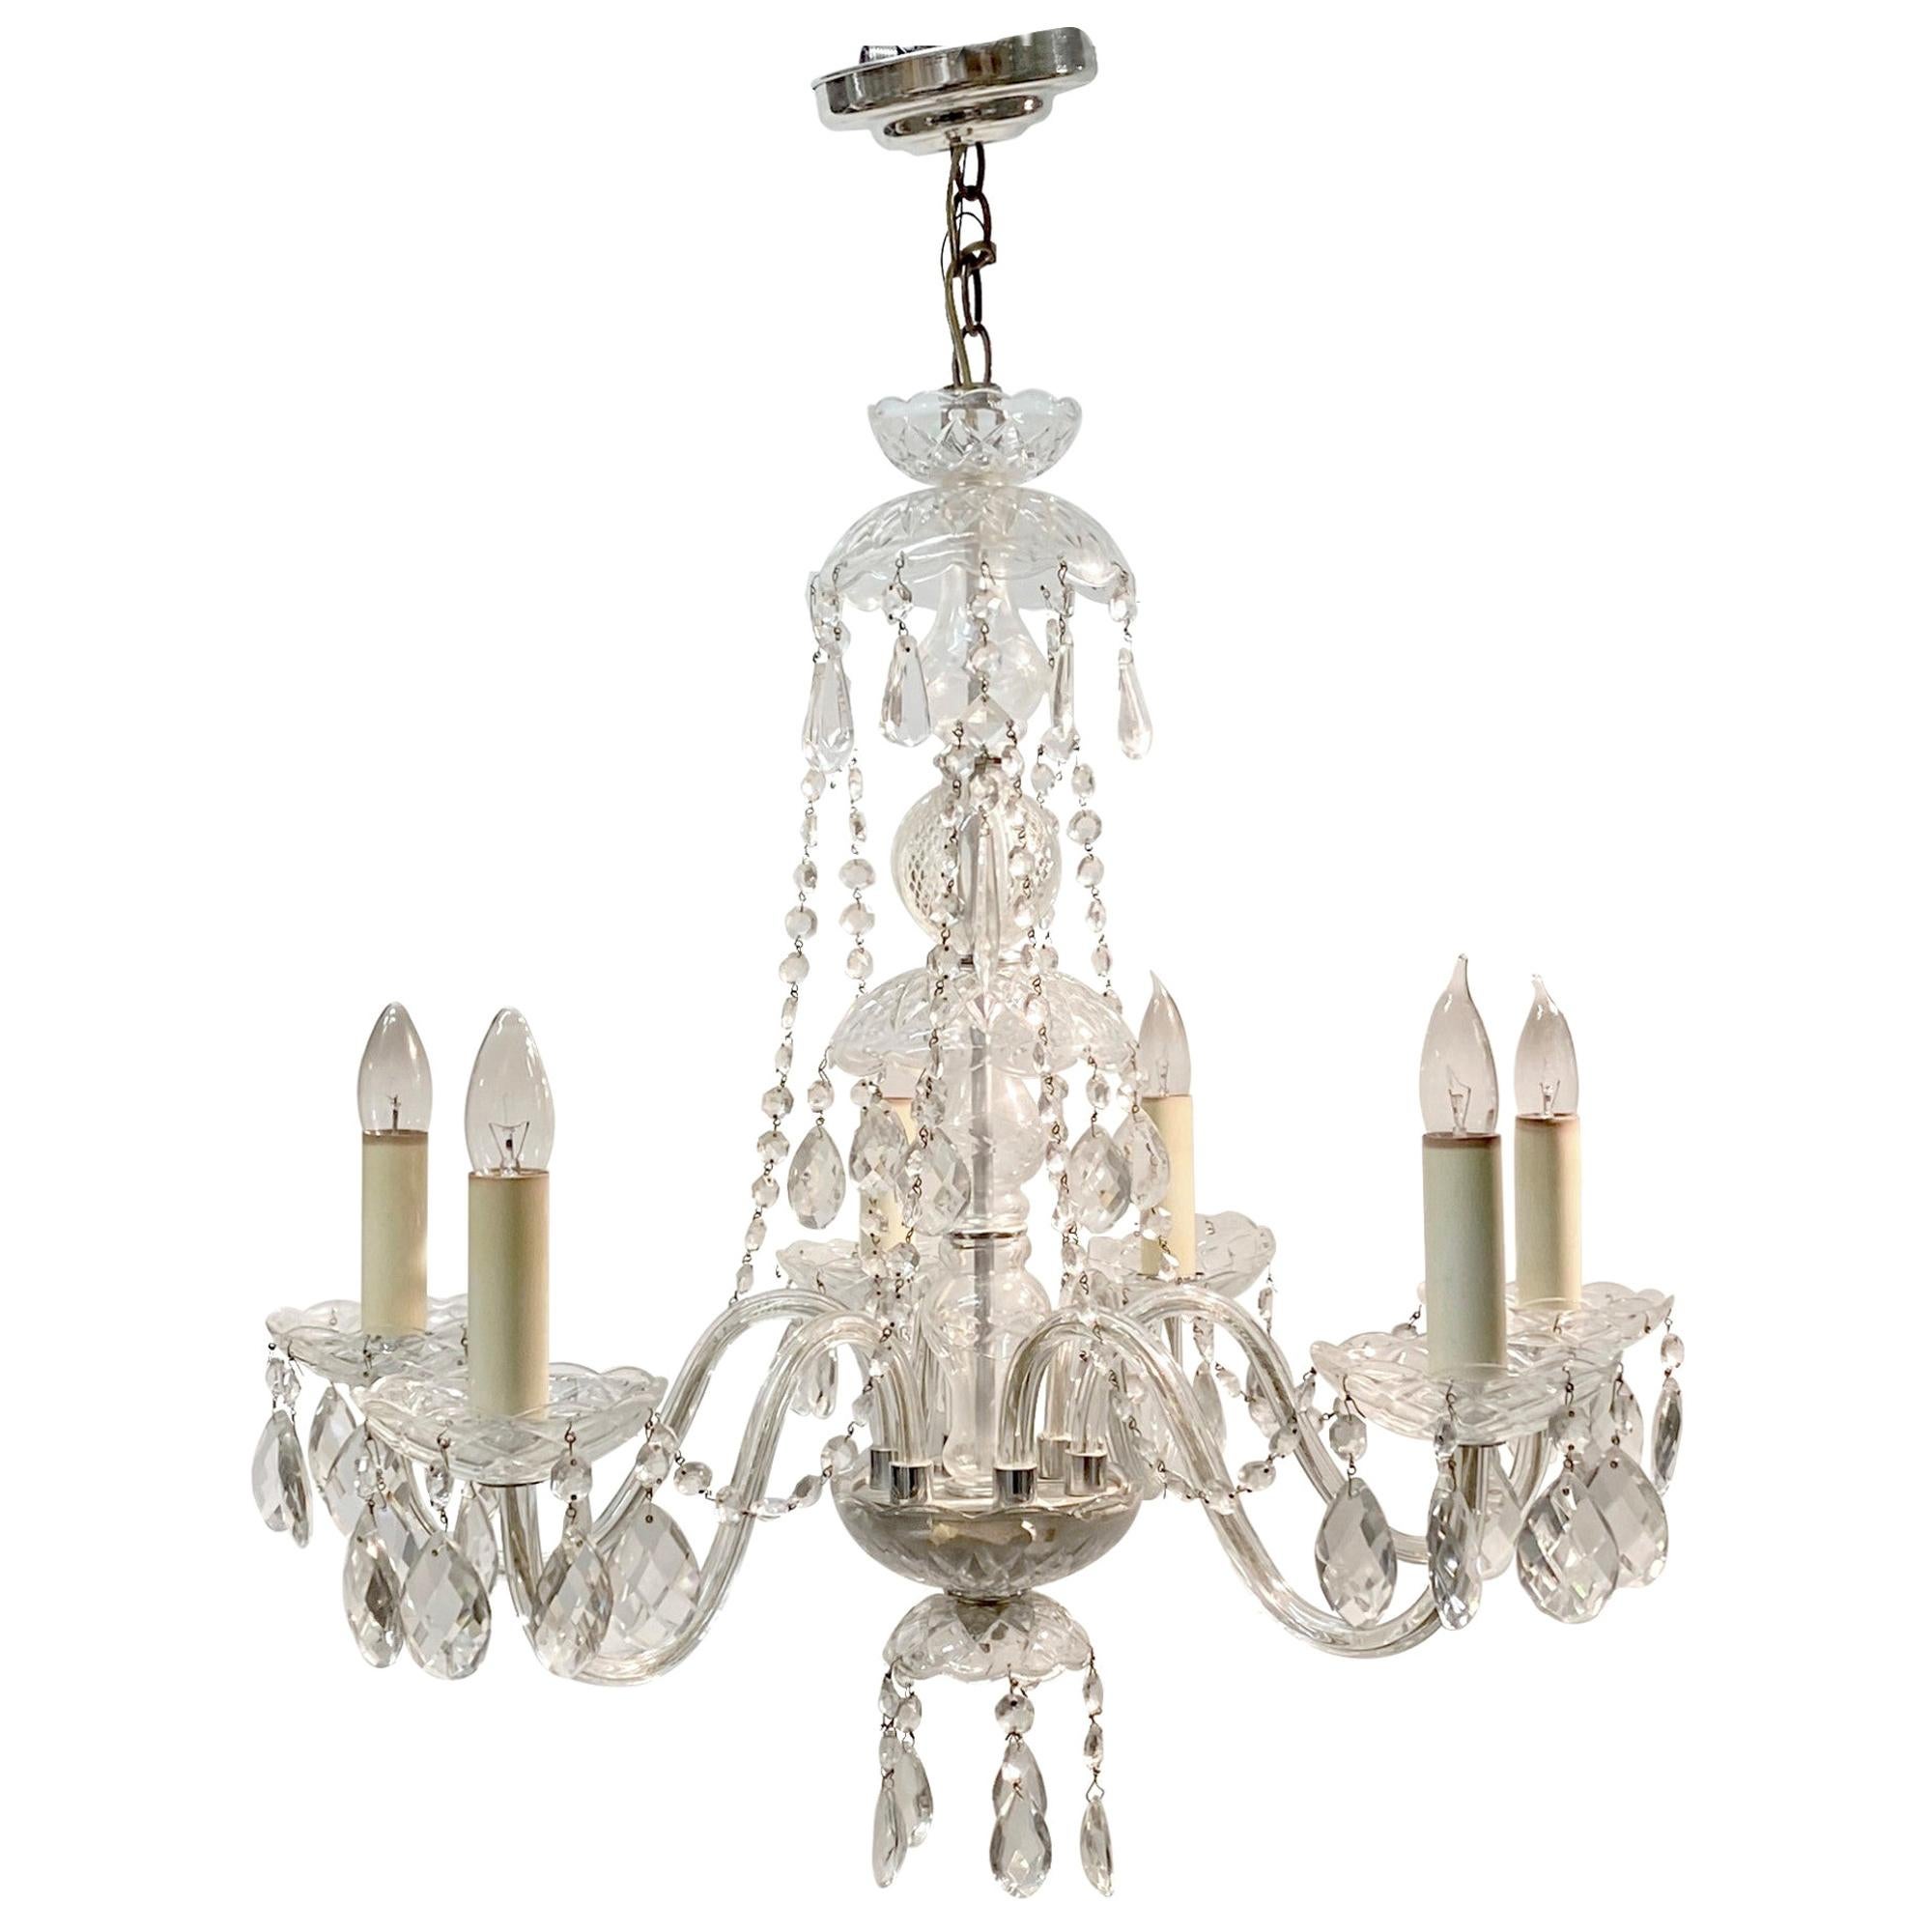 1920s Five-Arm Clear Crystal Chandelier with Crystal Swags